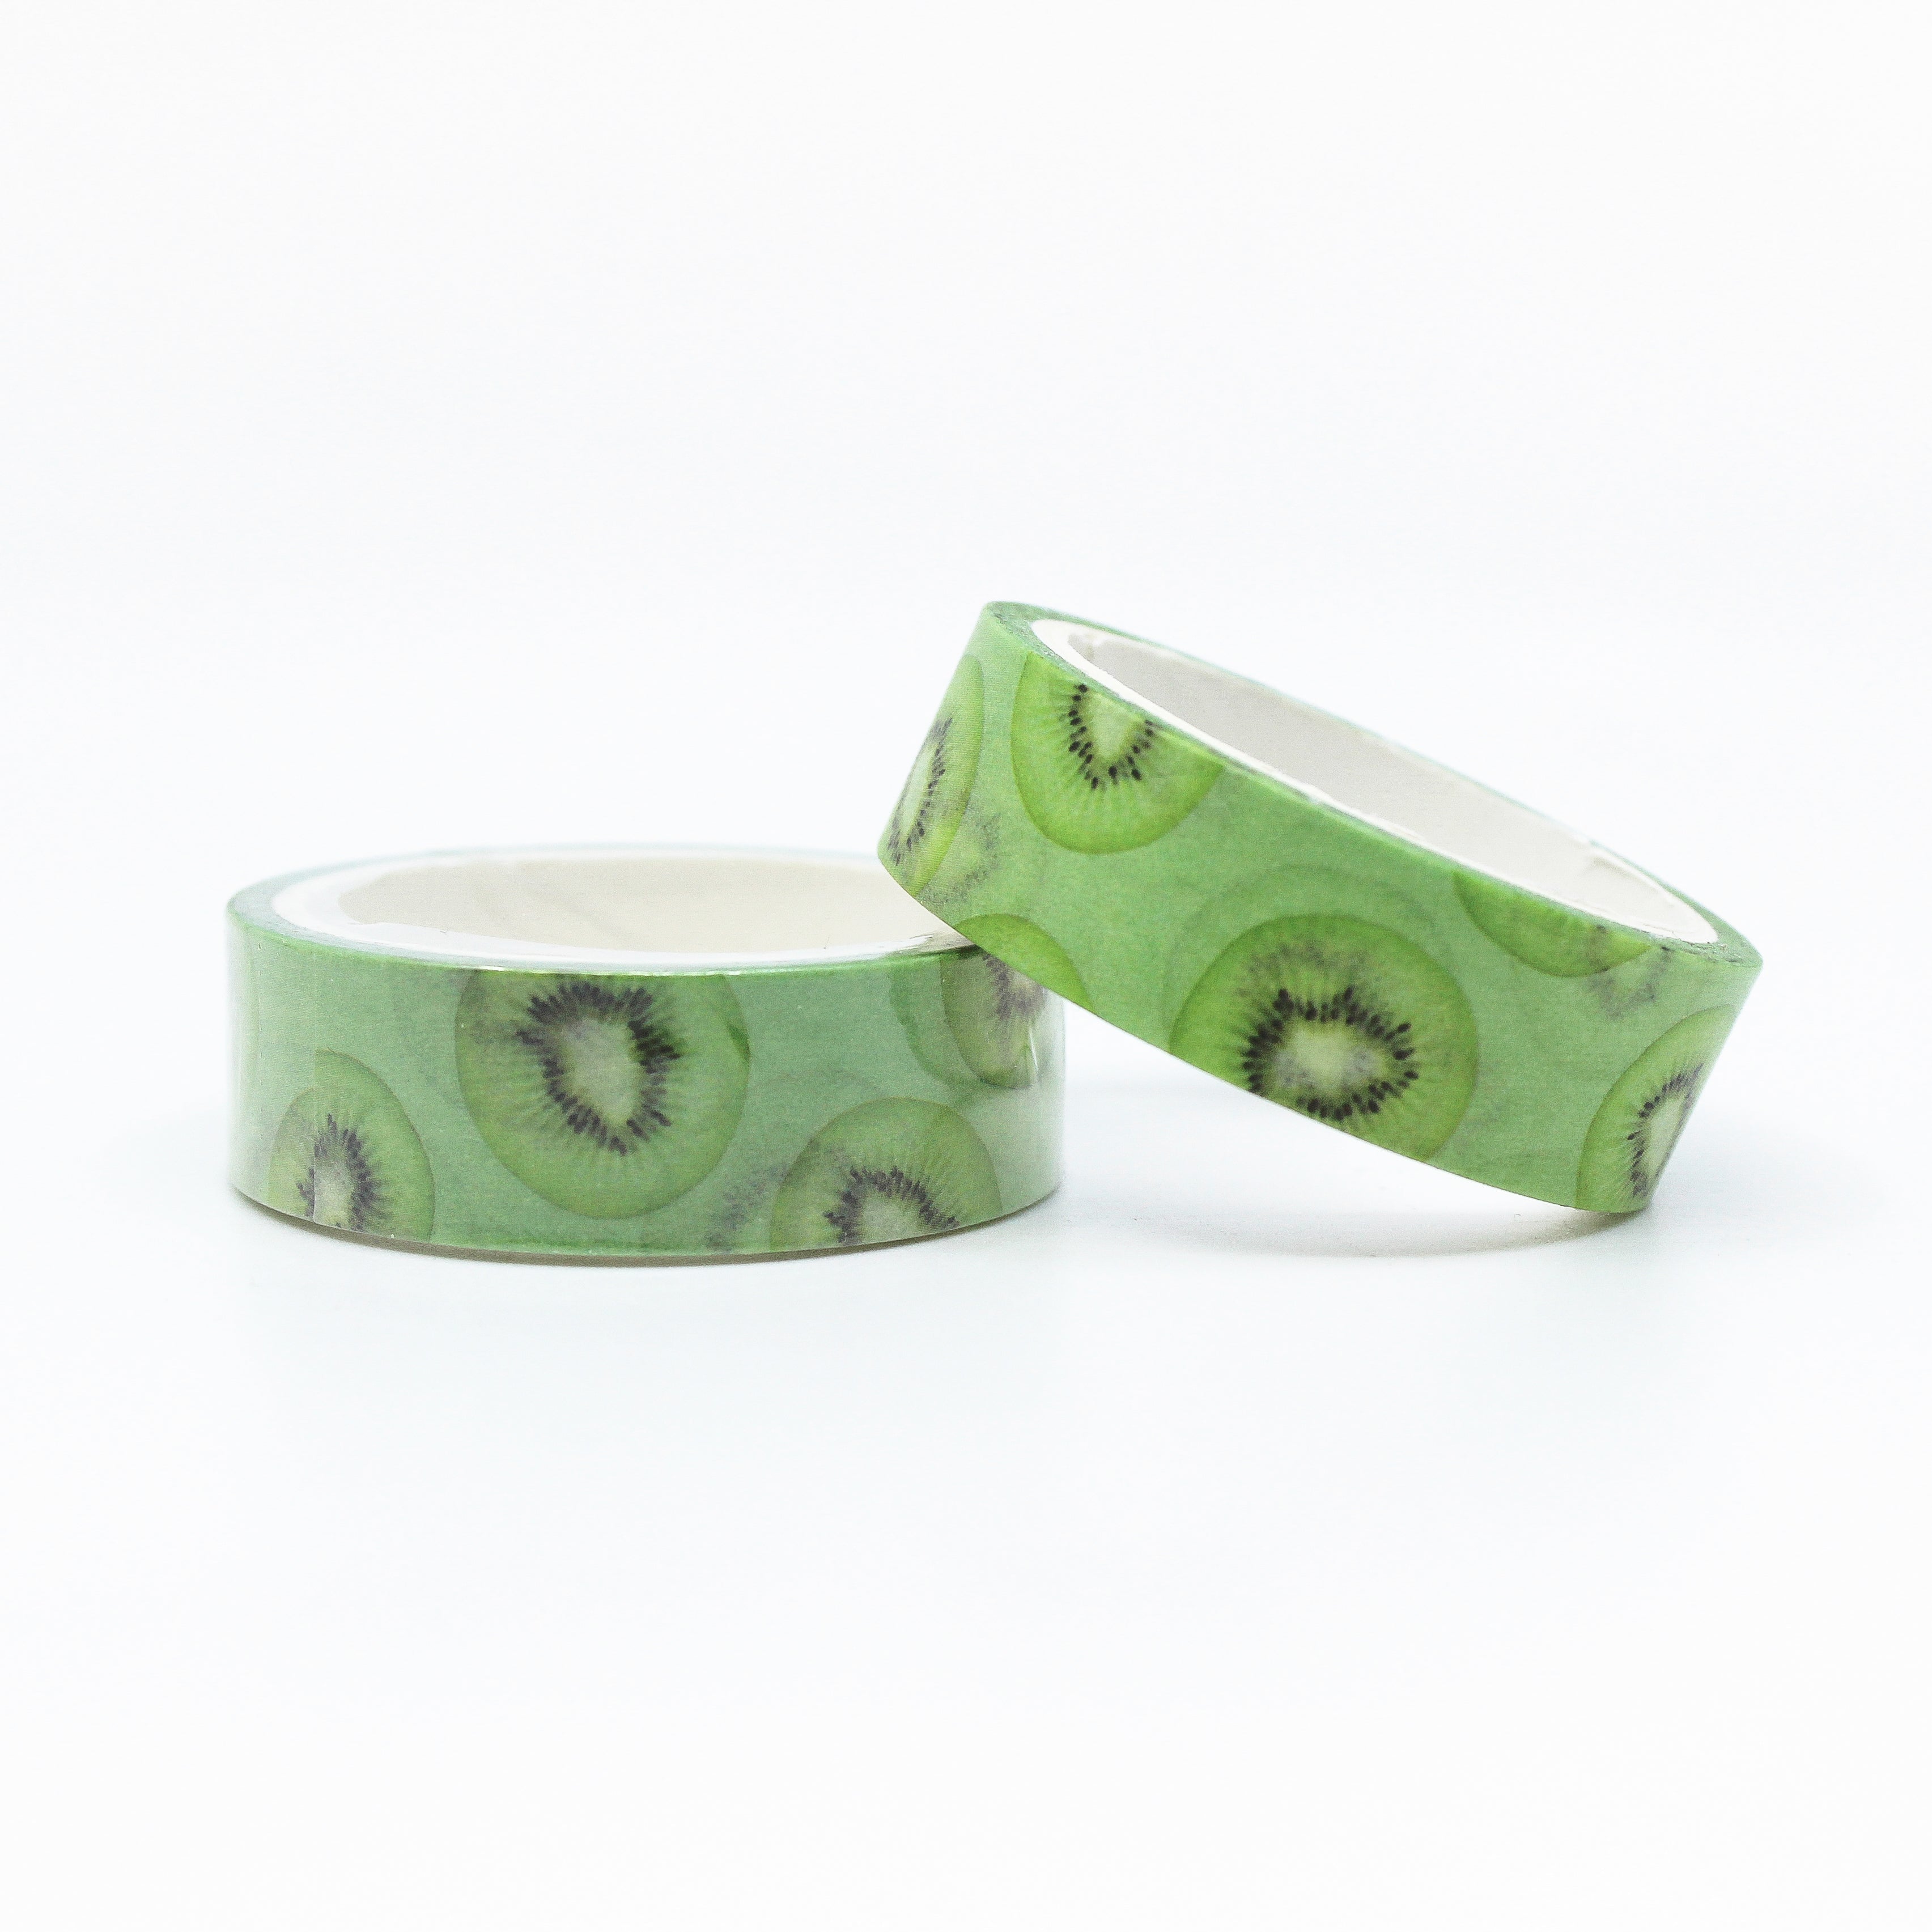 This is a beautiful collections of slice kiwi fruits washi tapes from BBB Supplies Craft Shop